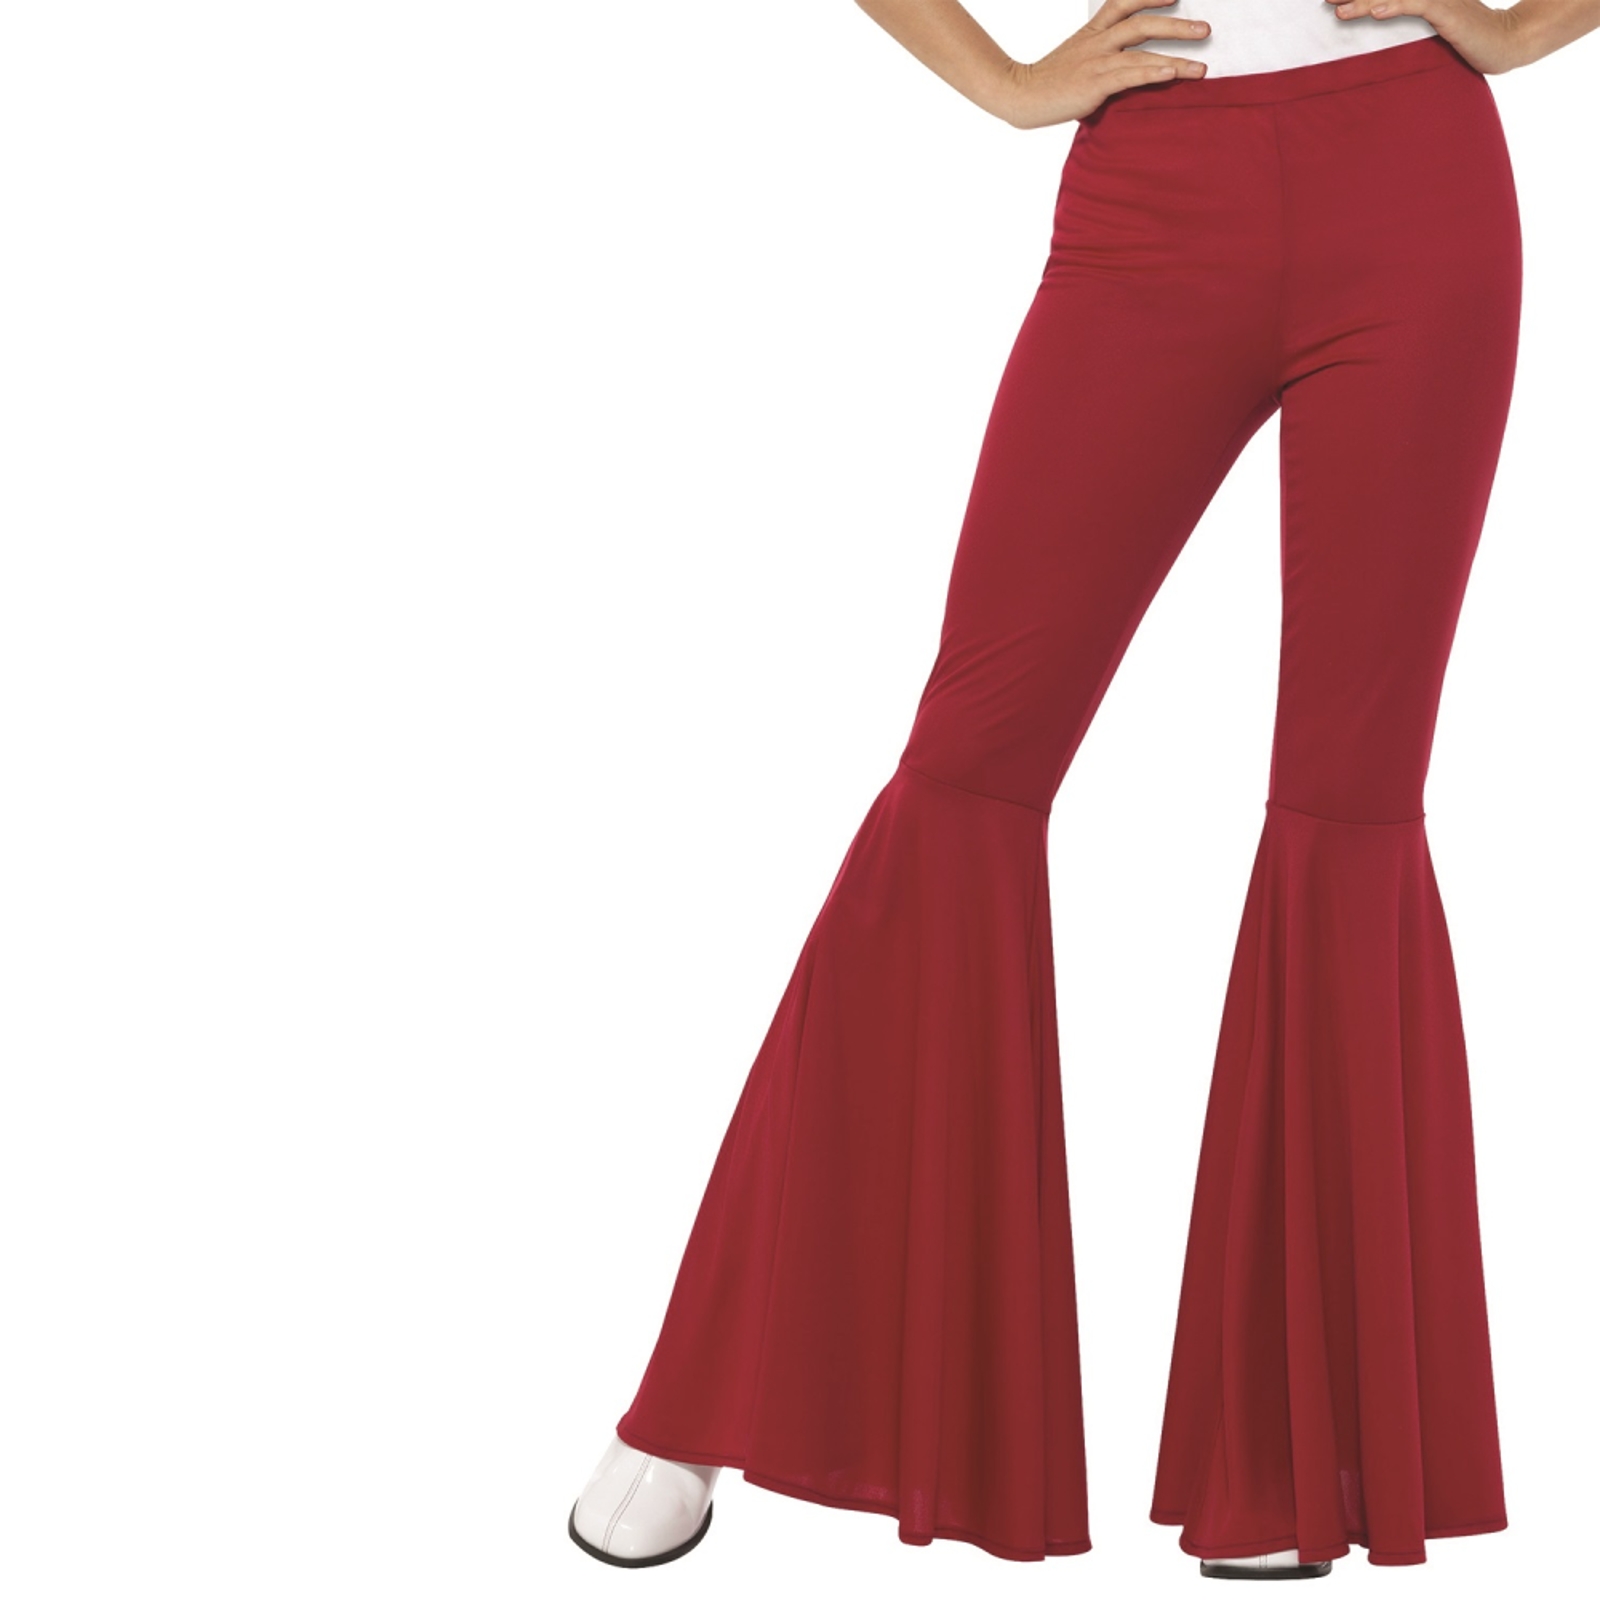 Flared Trousers - Red - SMI-21472 - Smiffys - Luvyababes